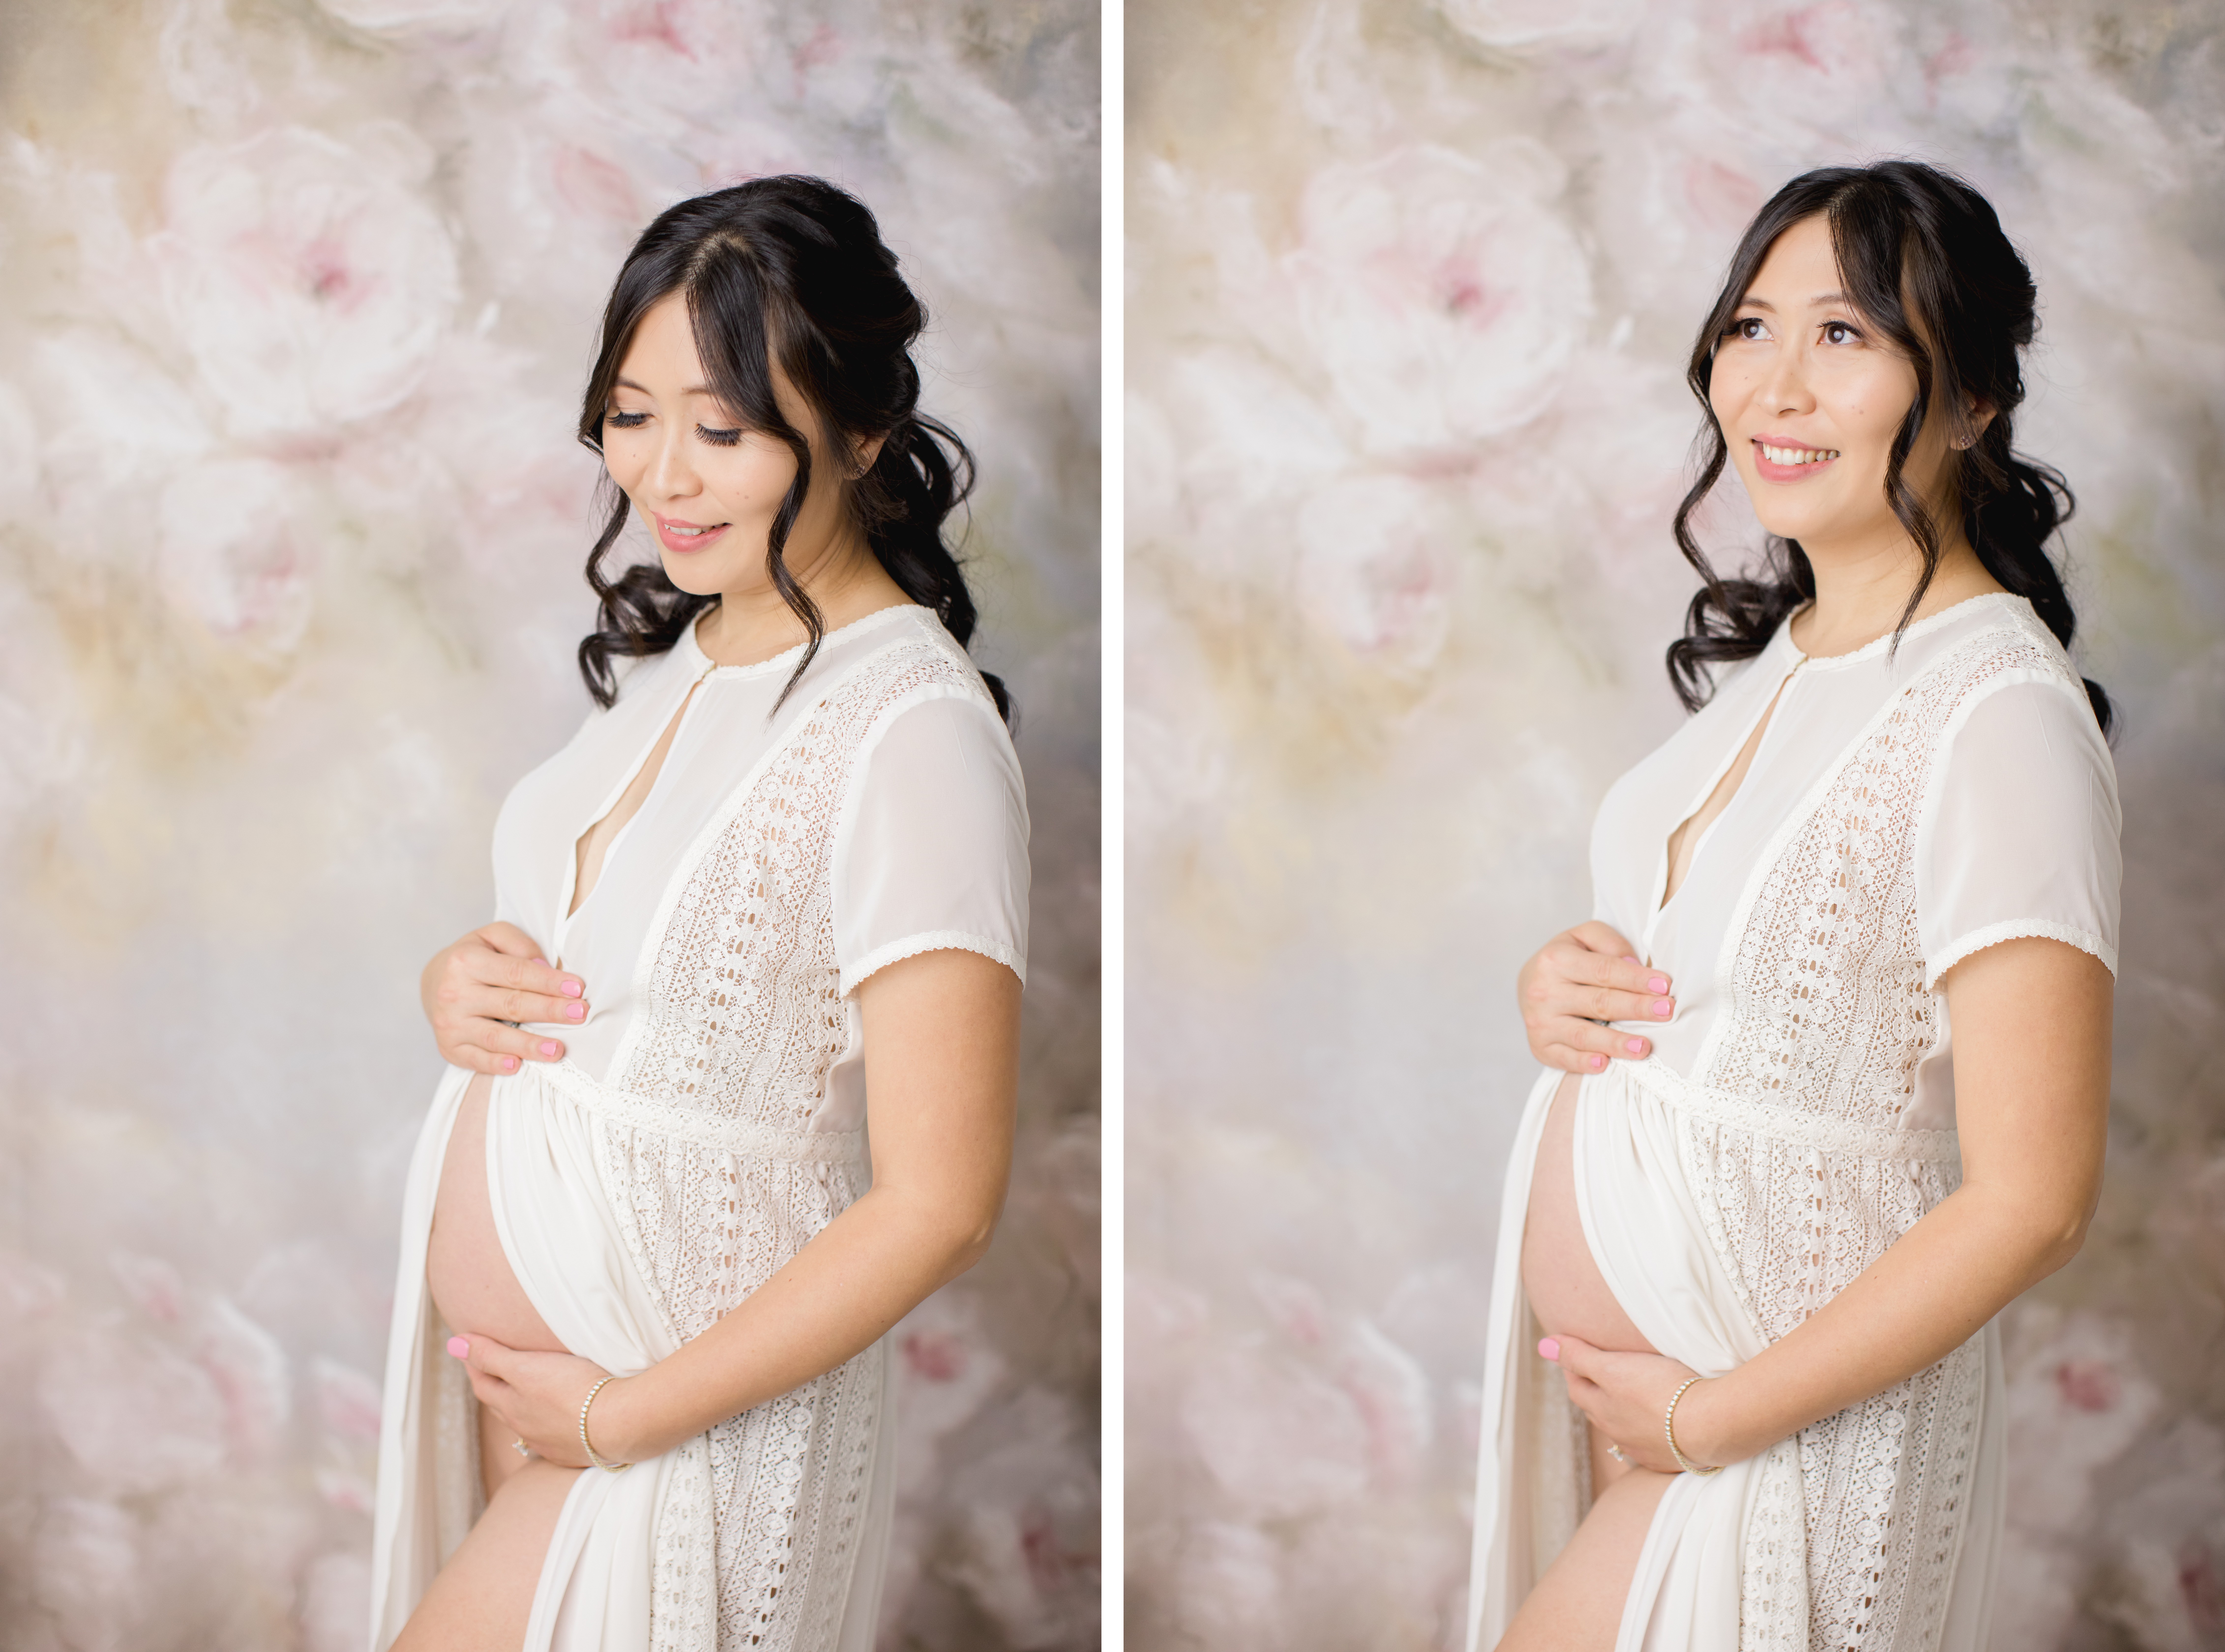 Intimate maternity portraits on floral background in reno sparks portrait studio